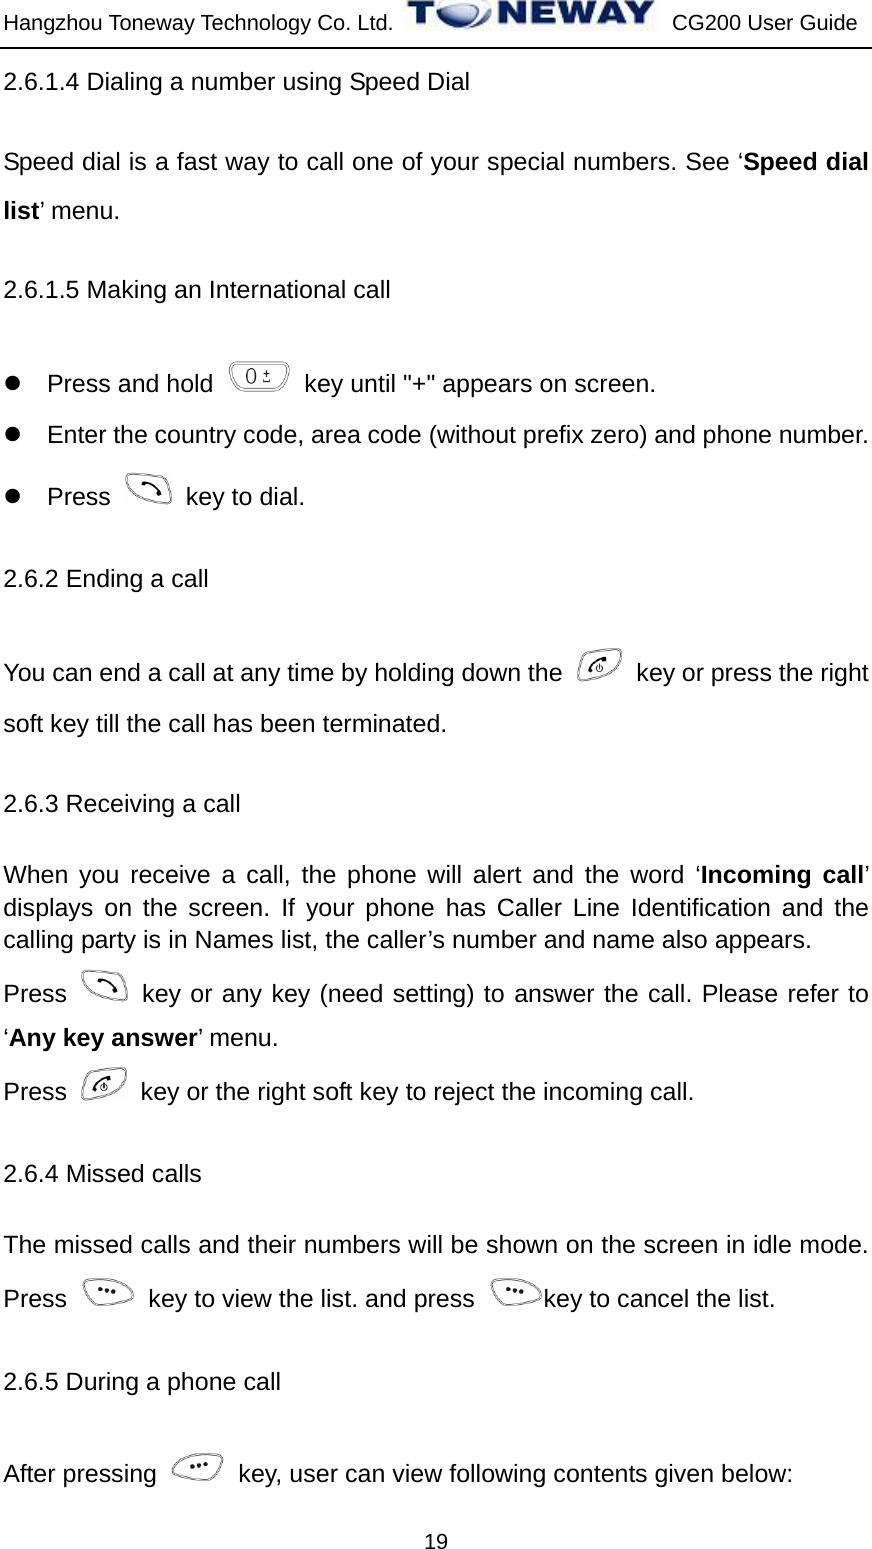 Hangzhou Toneway Technology Co. Ltd.    CG200 User Guide 19 2.6.1.4 Dialing a number using Speed Dial Speed dial is a fast way to call one of your special numbers. See ‘Speed dial list’ menu. 2.6.1.5 Making an International call z Press and hold    key until &quot;+&quot; appears on screen. z  Enter the country code, area code (without prefix zero) and phone number. z Press    key to dial. 2.6.2 Ending a call You can end a call at any time by holding down the    key or press the right soft key till the call has been terminated. 2.6.3 Receiving a call   When you receive a call, the phone will alert and the word ‘Incoming call’ displays on the screen. If your phone has Caller Line Identification and the calling party is in Names list, the caller’s number and name also appears. Press   key or any key (need setting) to answer the call. Please refer to ‘Any key answer’ menu. Press    key or the right soft key to reject the incoming call. 2.6.4 Missed calls The missed calls and their numbers will be shown on the screen in idle mode. Press    key to view the list. and press  key to cancel the list.   2.6.5 During a phone call After pressing    key, user can view following contents given below: 